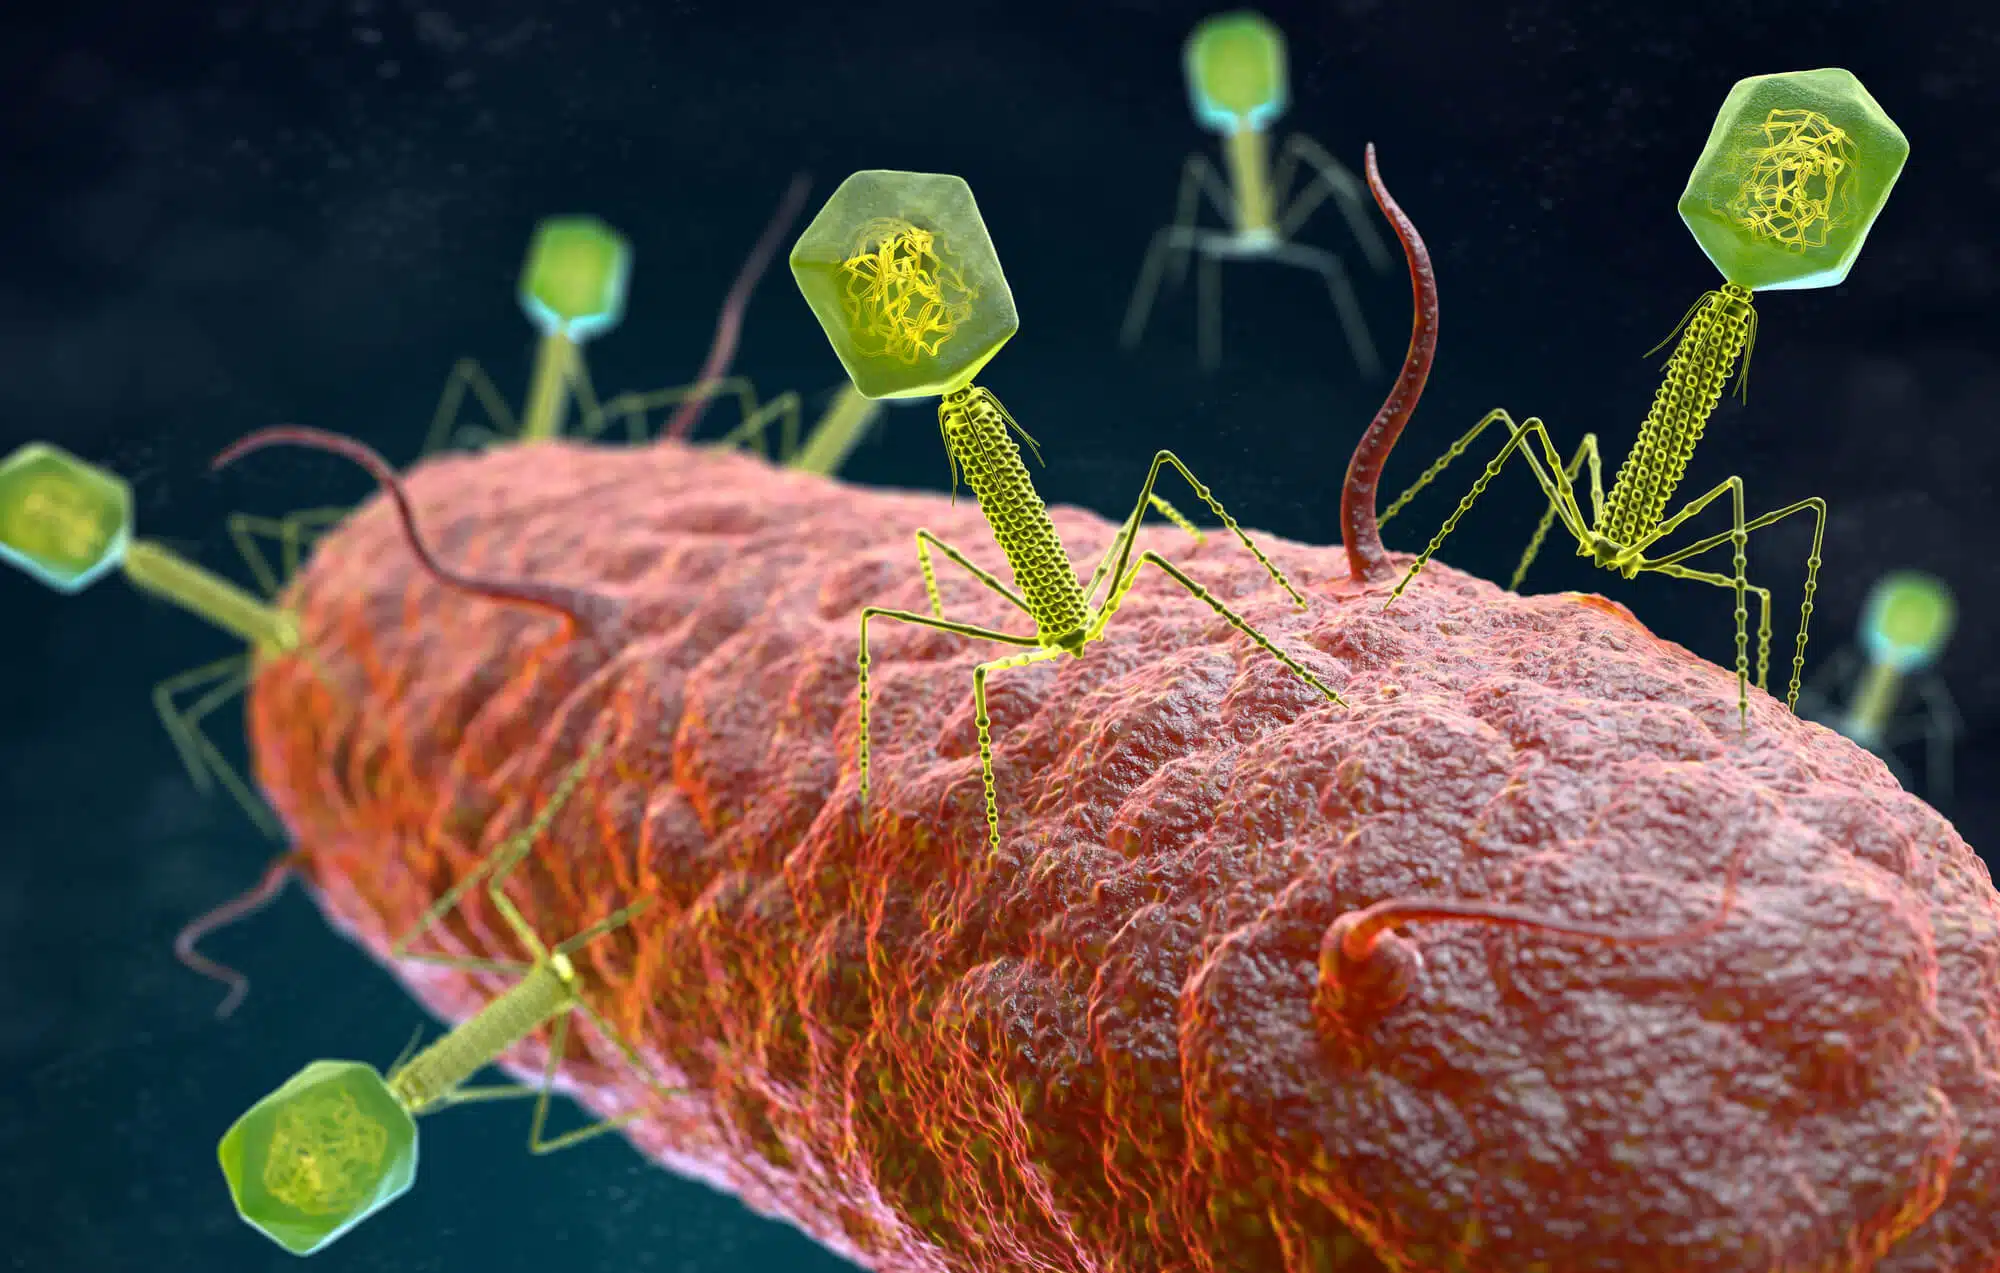 Bacteriophages (phages) attack bacteria (illustration) Image: depositphotos.com